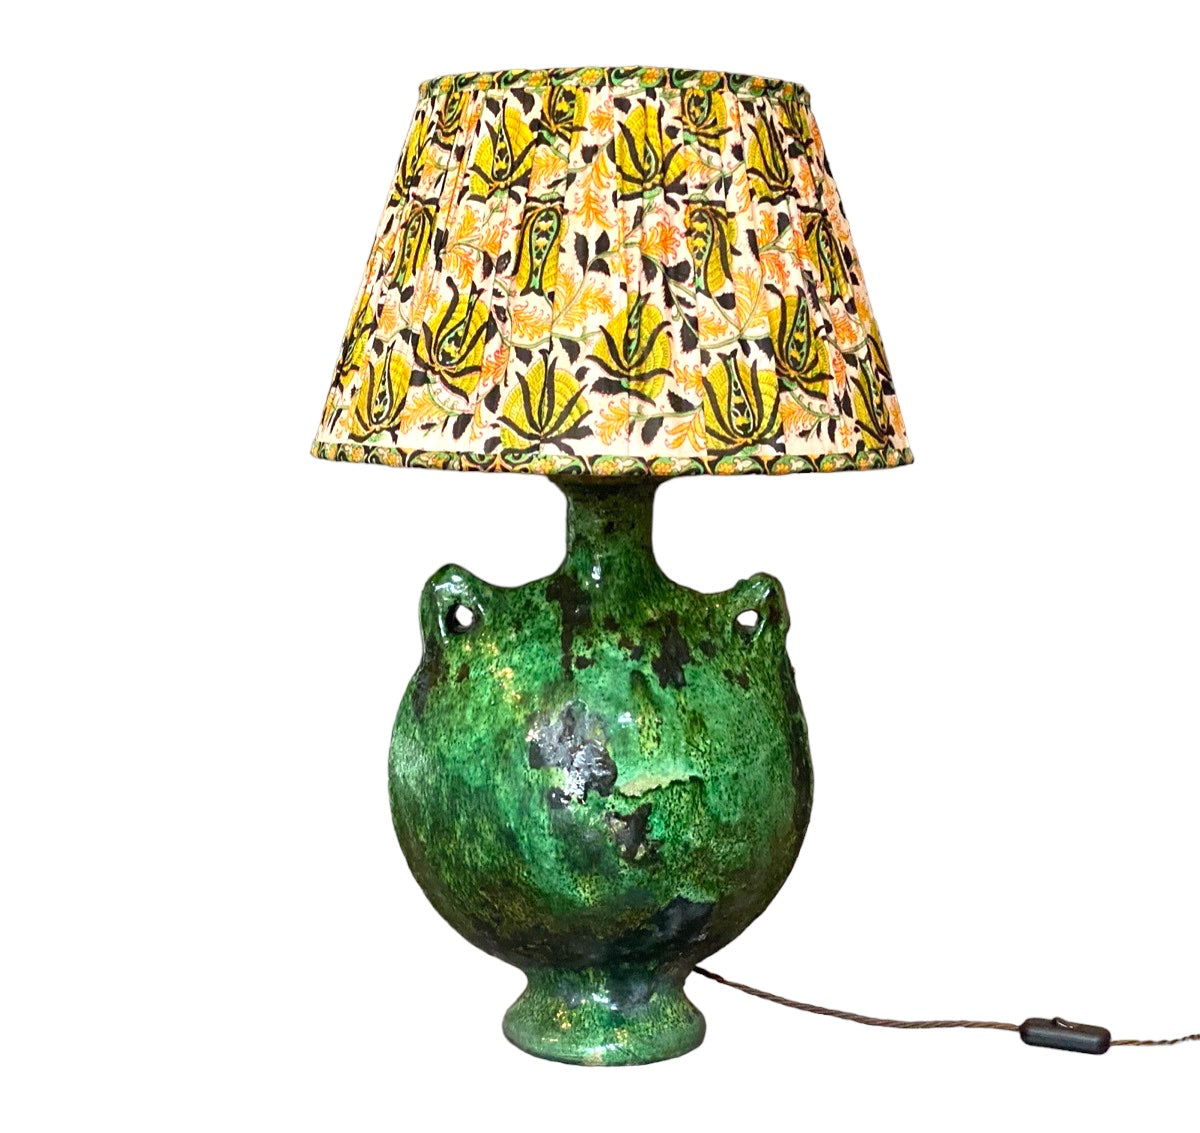 Green urn table lamp